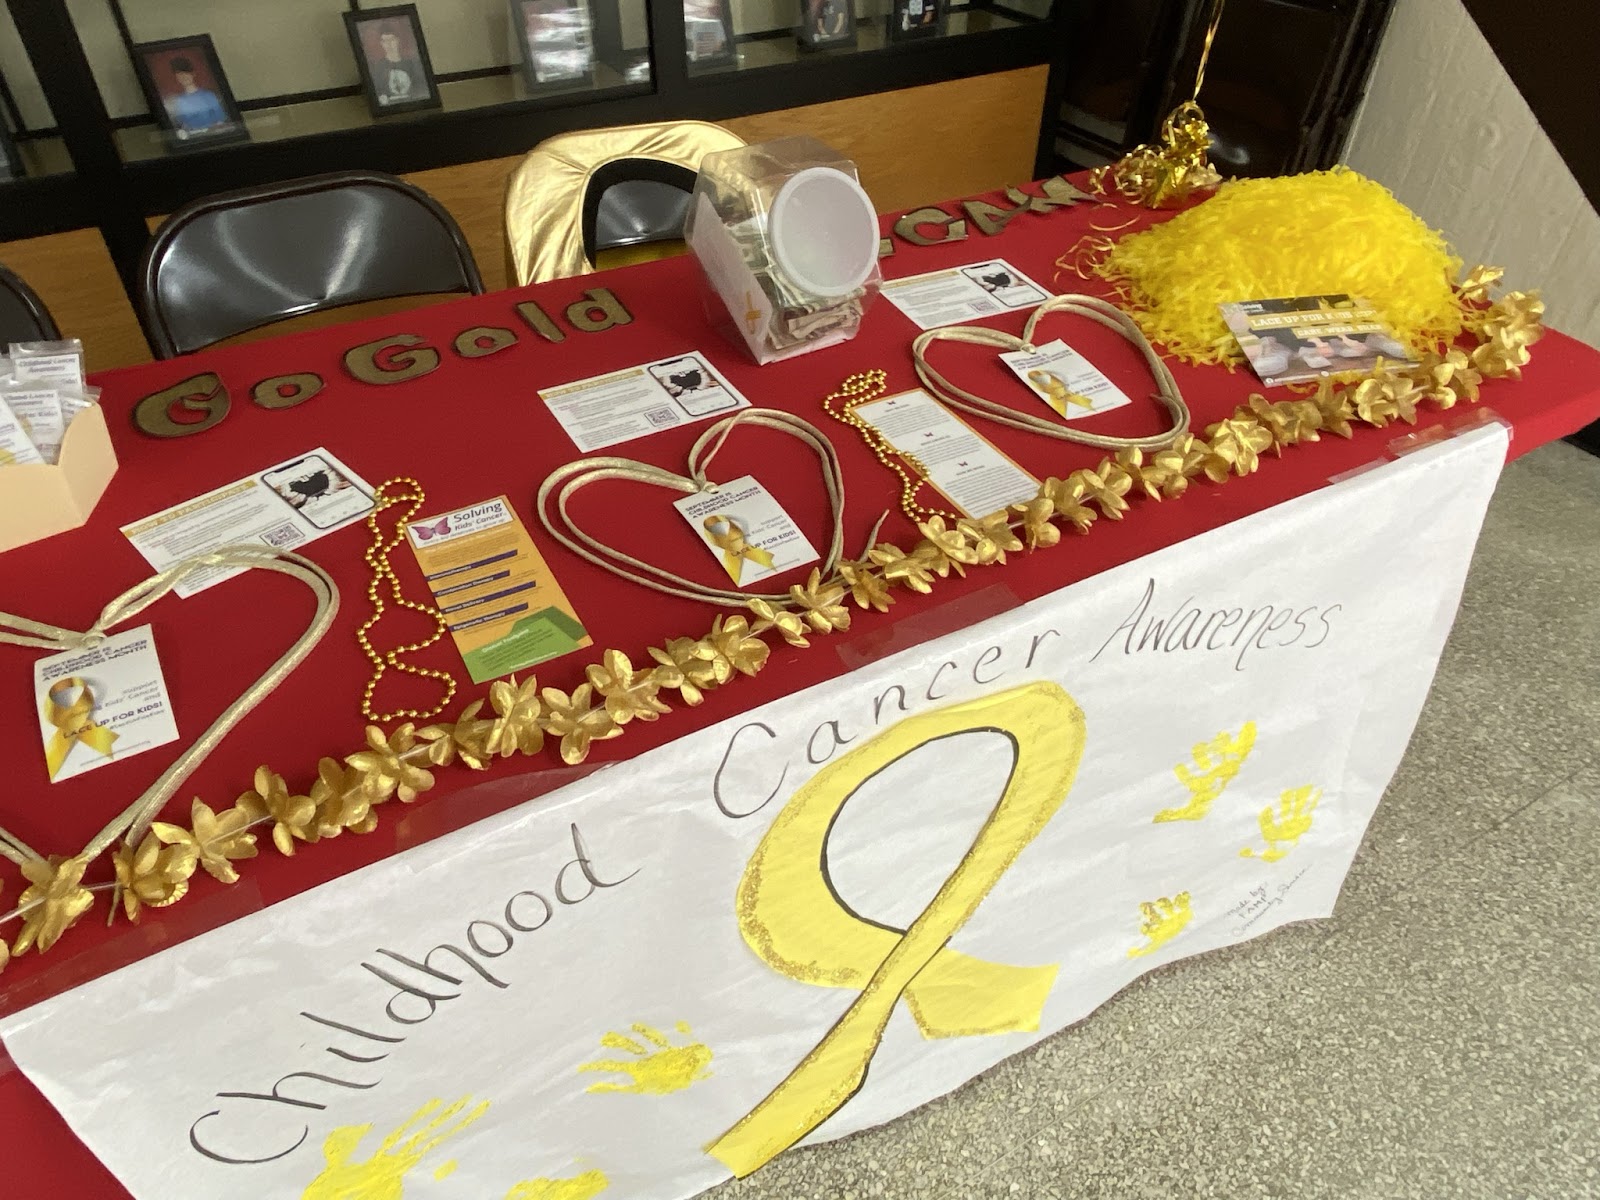 Table covered in red tablecloth with gold shoelaces and a banner saying "Childhood Cancer Awareness" 